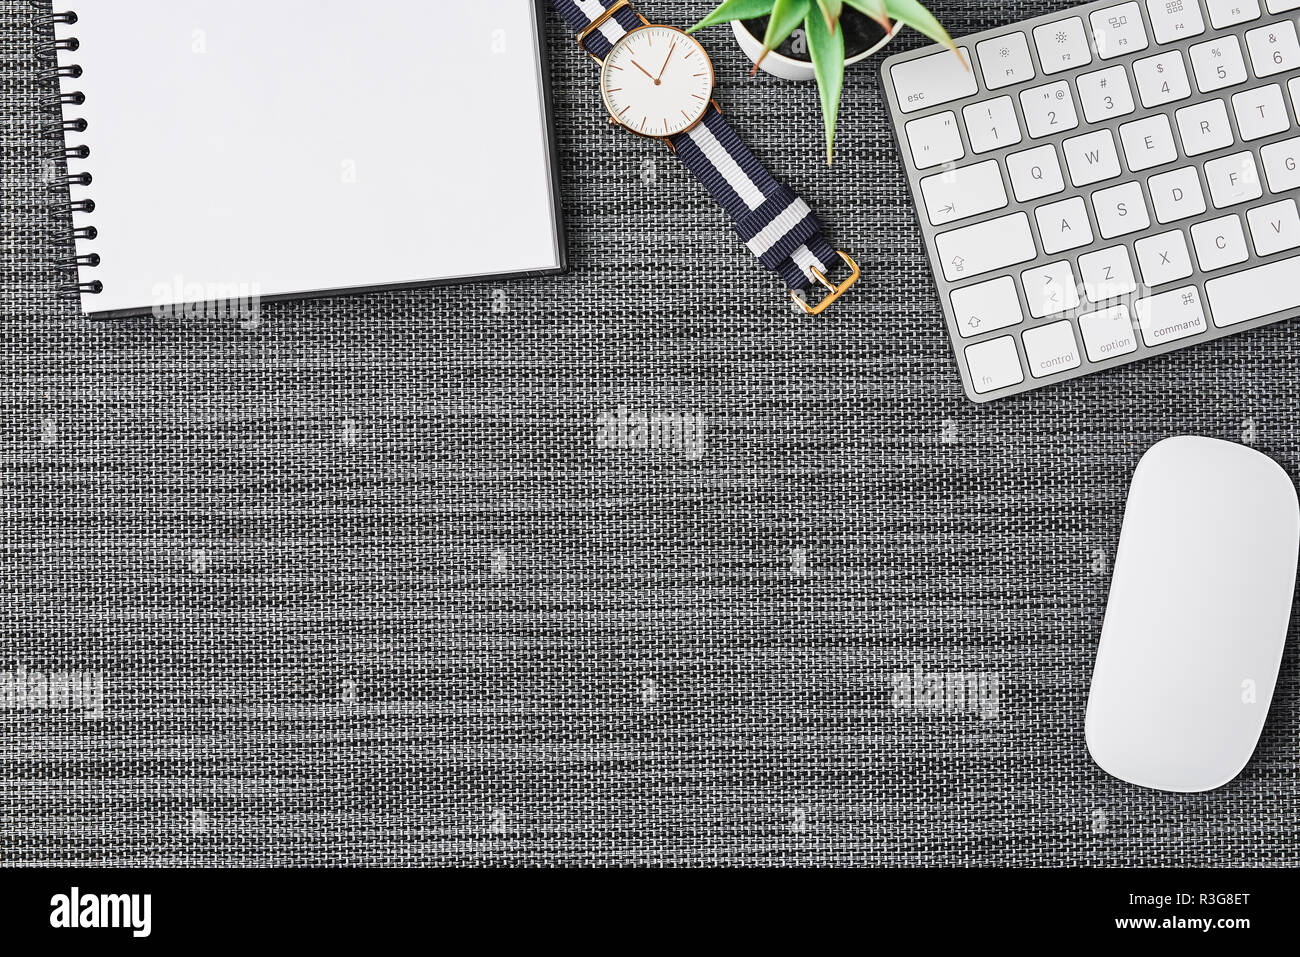 Business composition with white computer keyboard, mouse, coffee cup, women's watch, artificial plant and notebook on grey background. Top view with c Stock Photo